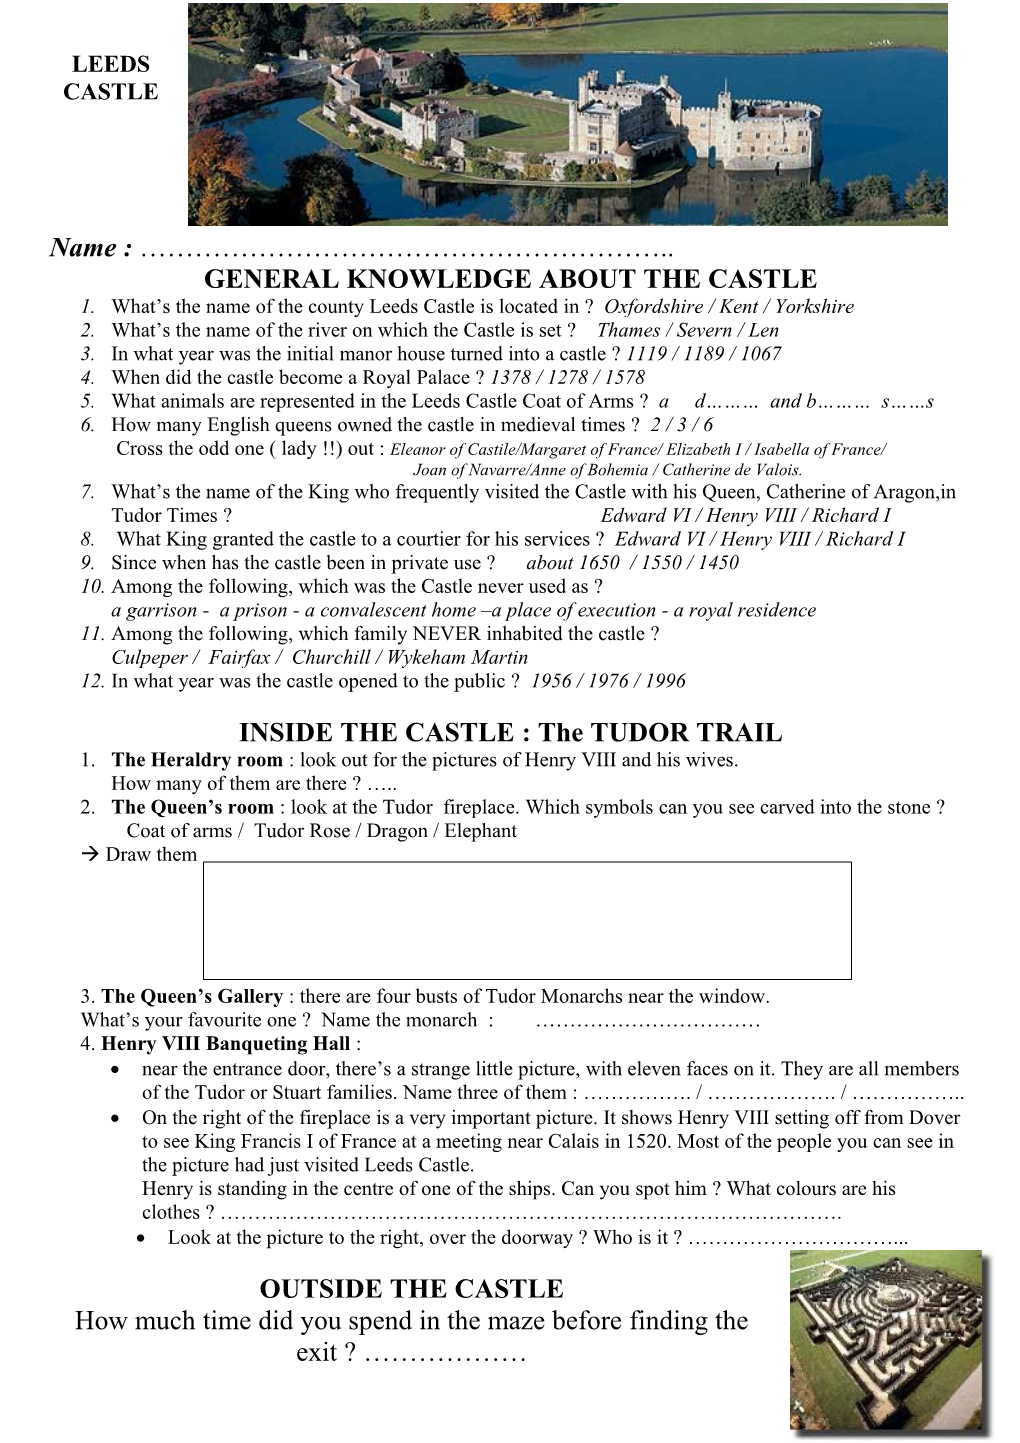 General Knowledge About the Castle